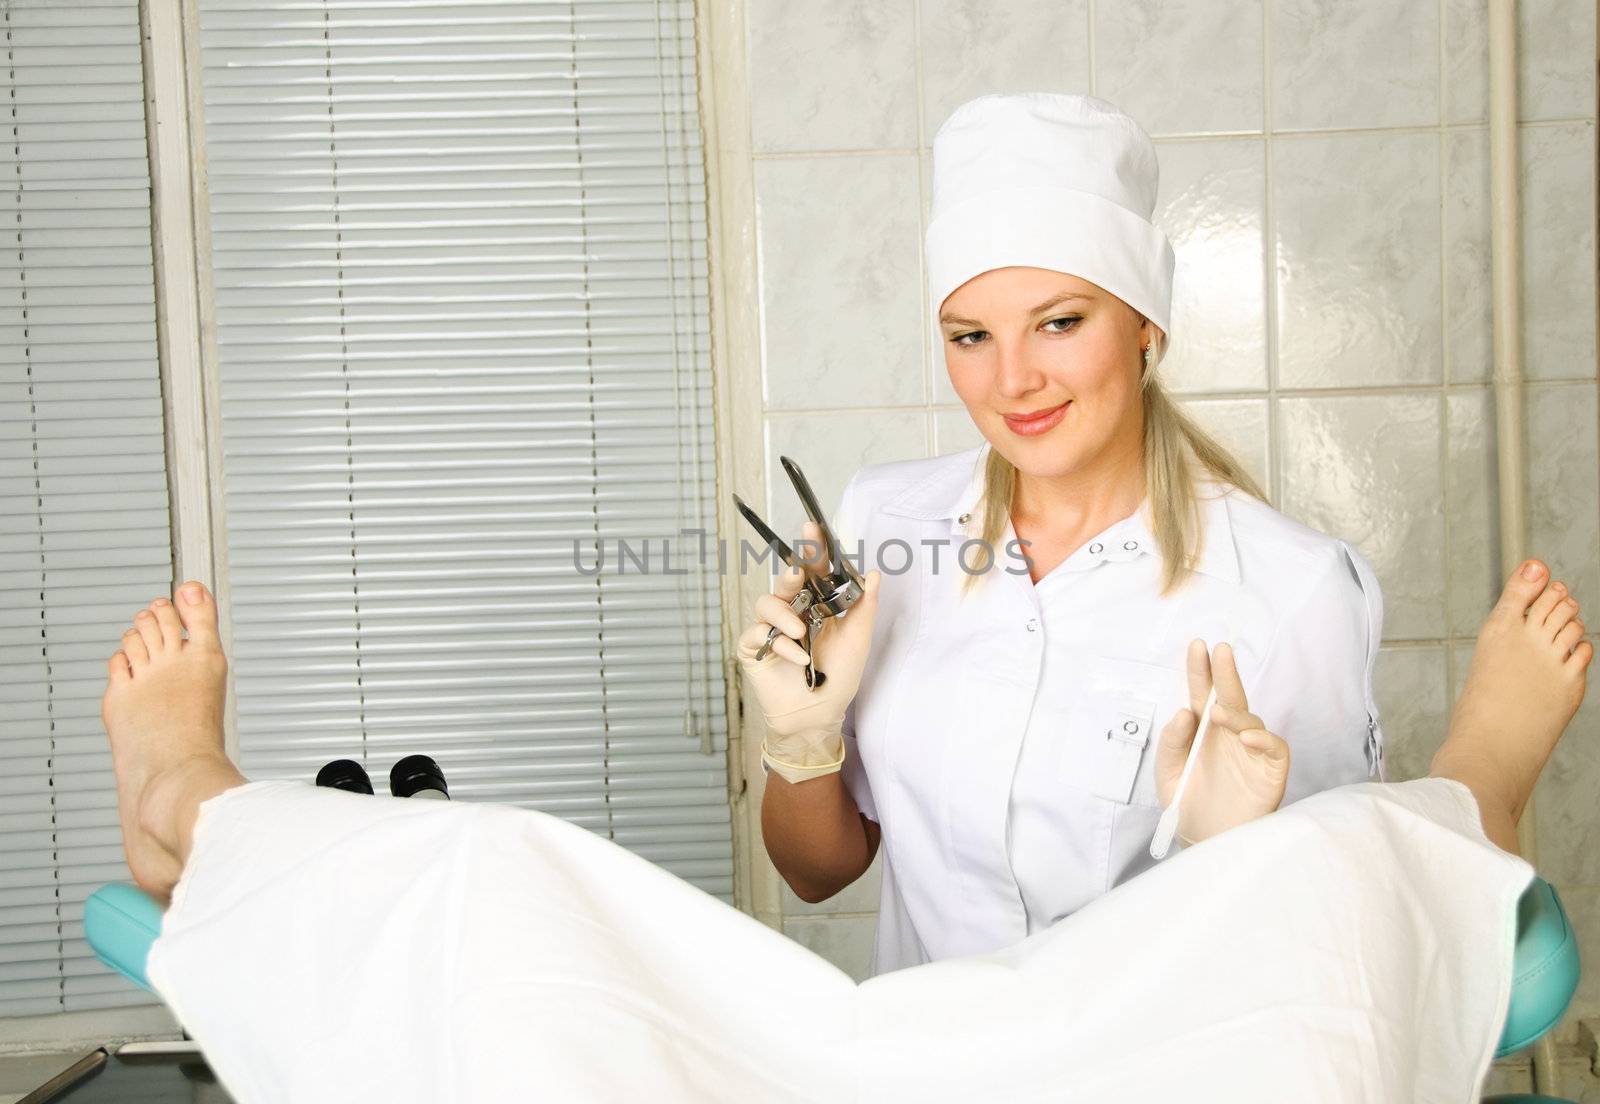 gynecologist examining a patient  by lanak